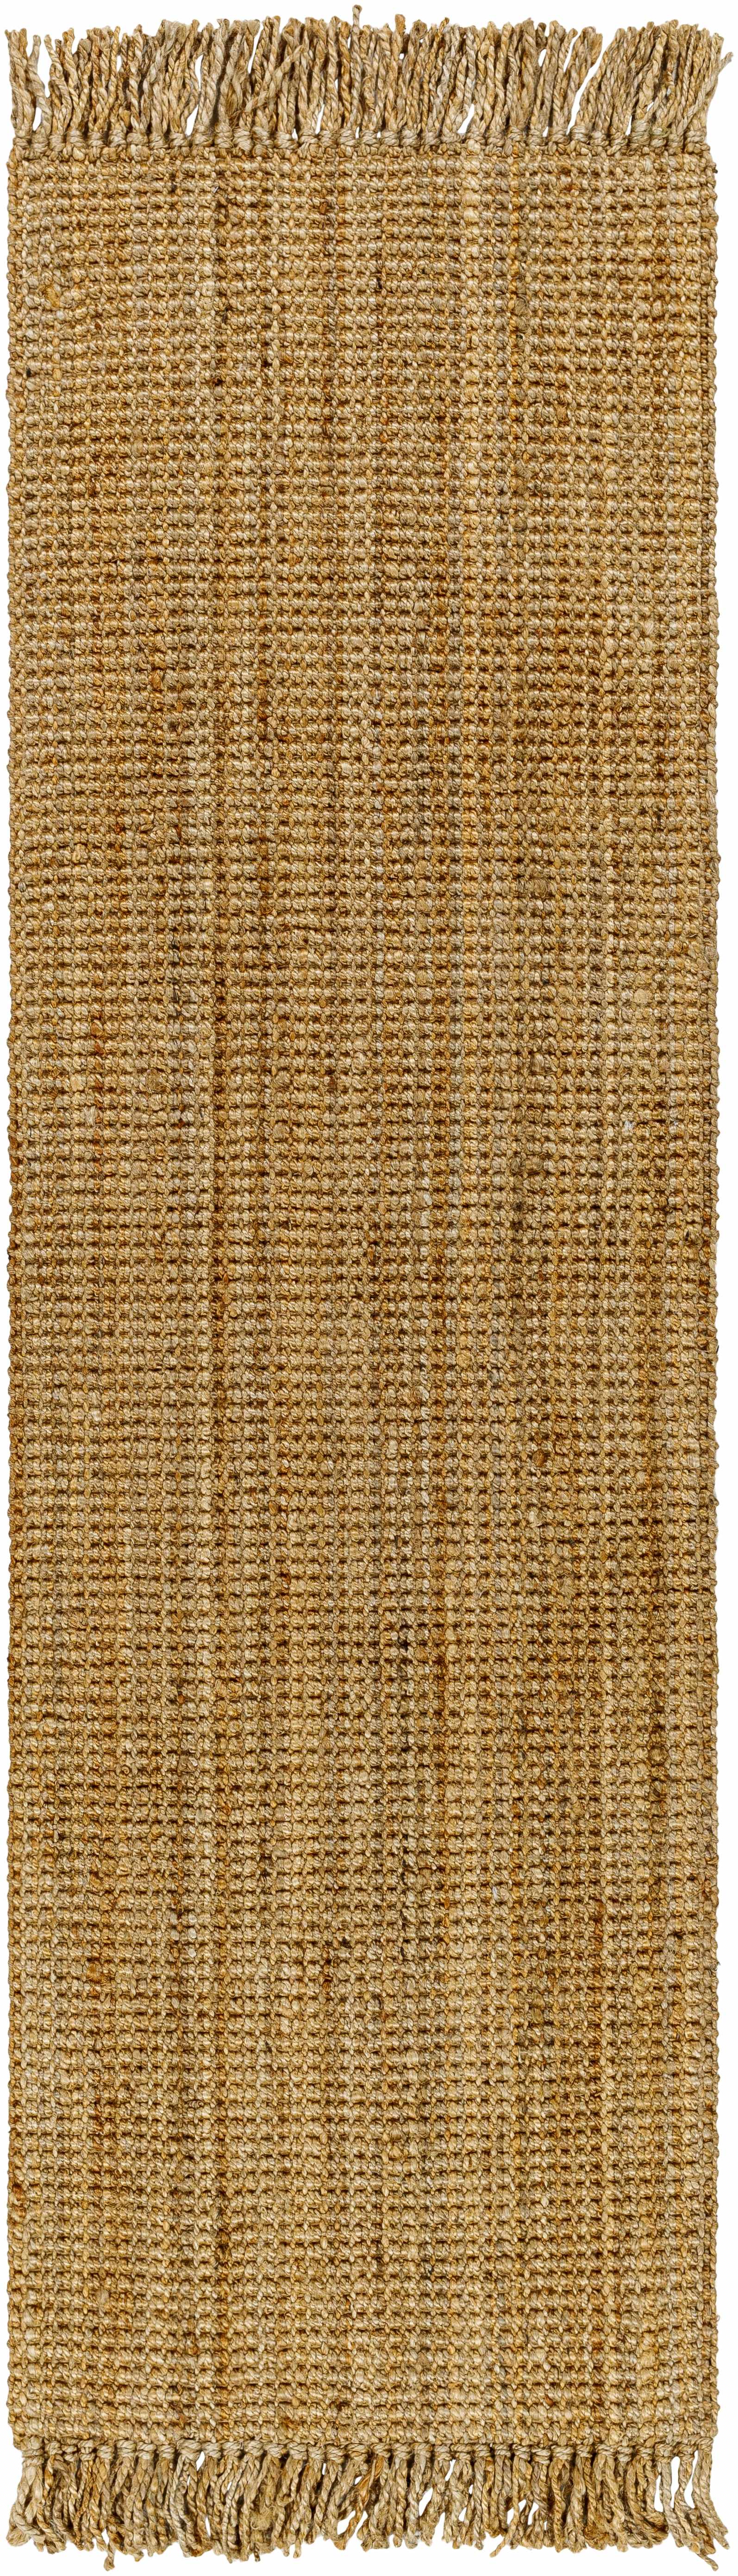 Boutique Rugs Rugs Senneterre Natural Jute Rug